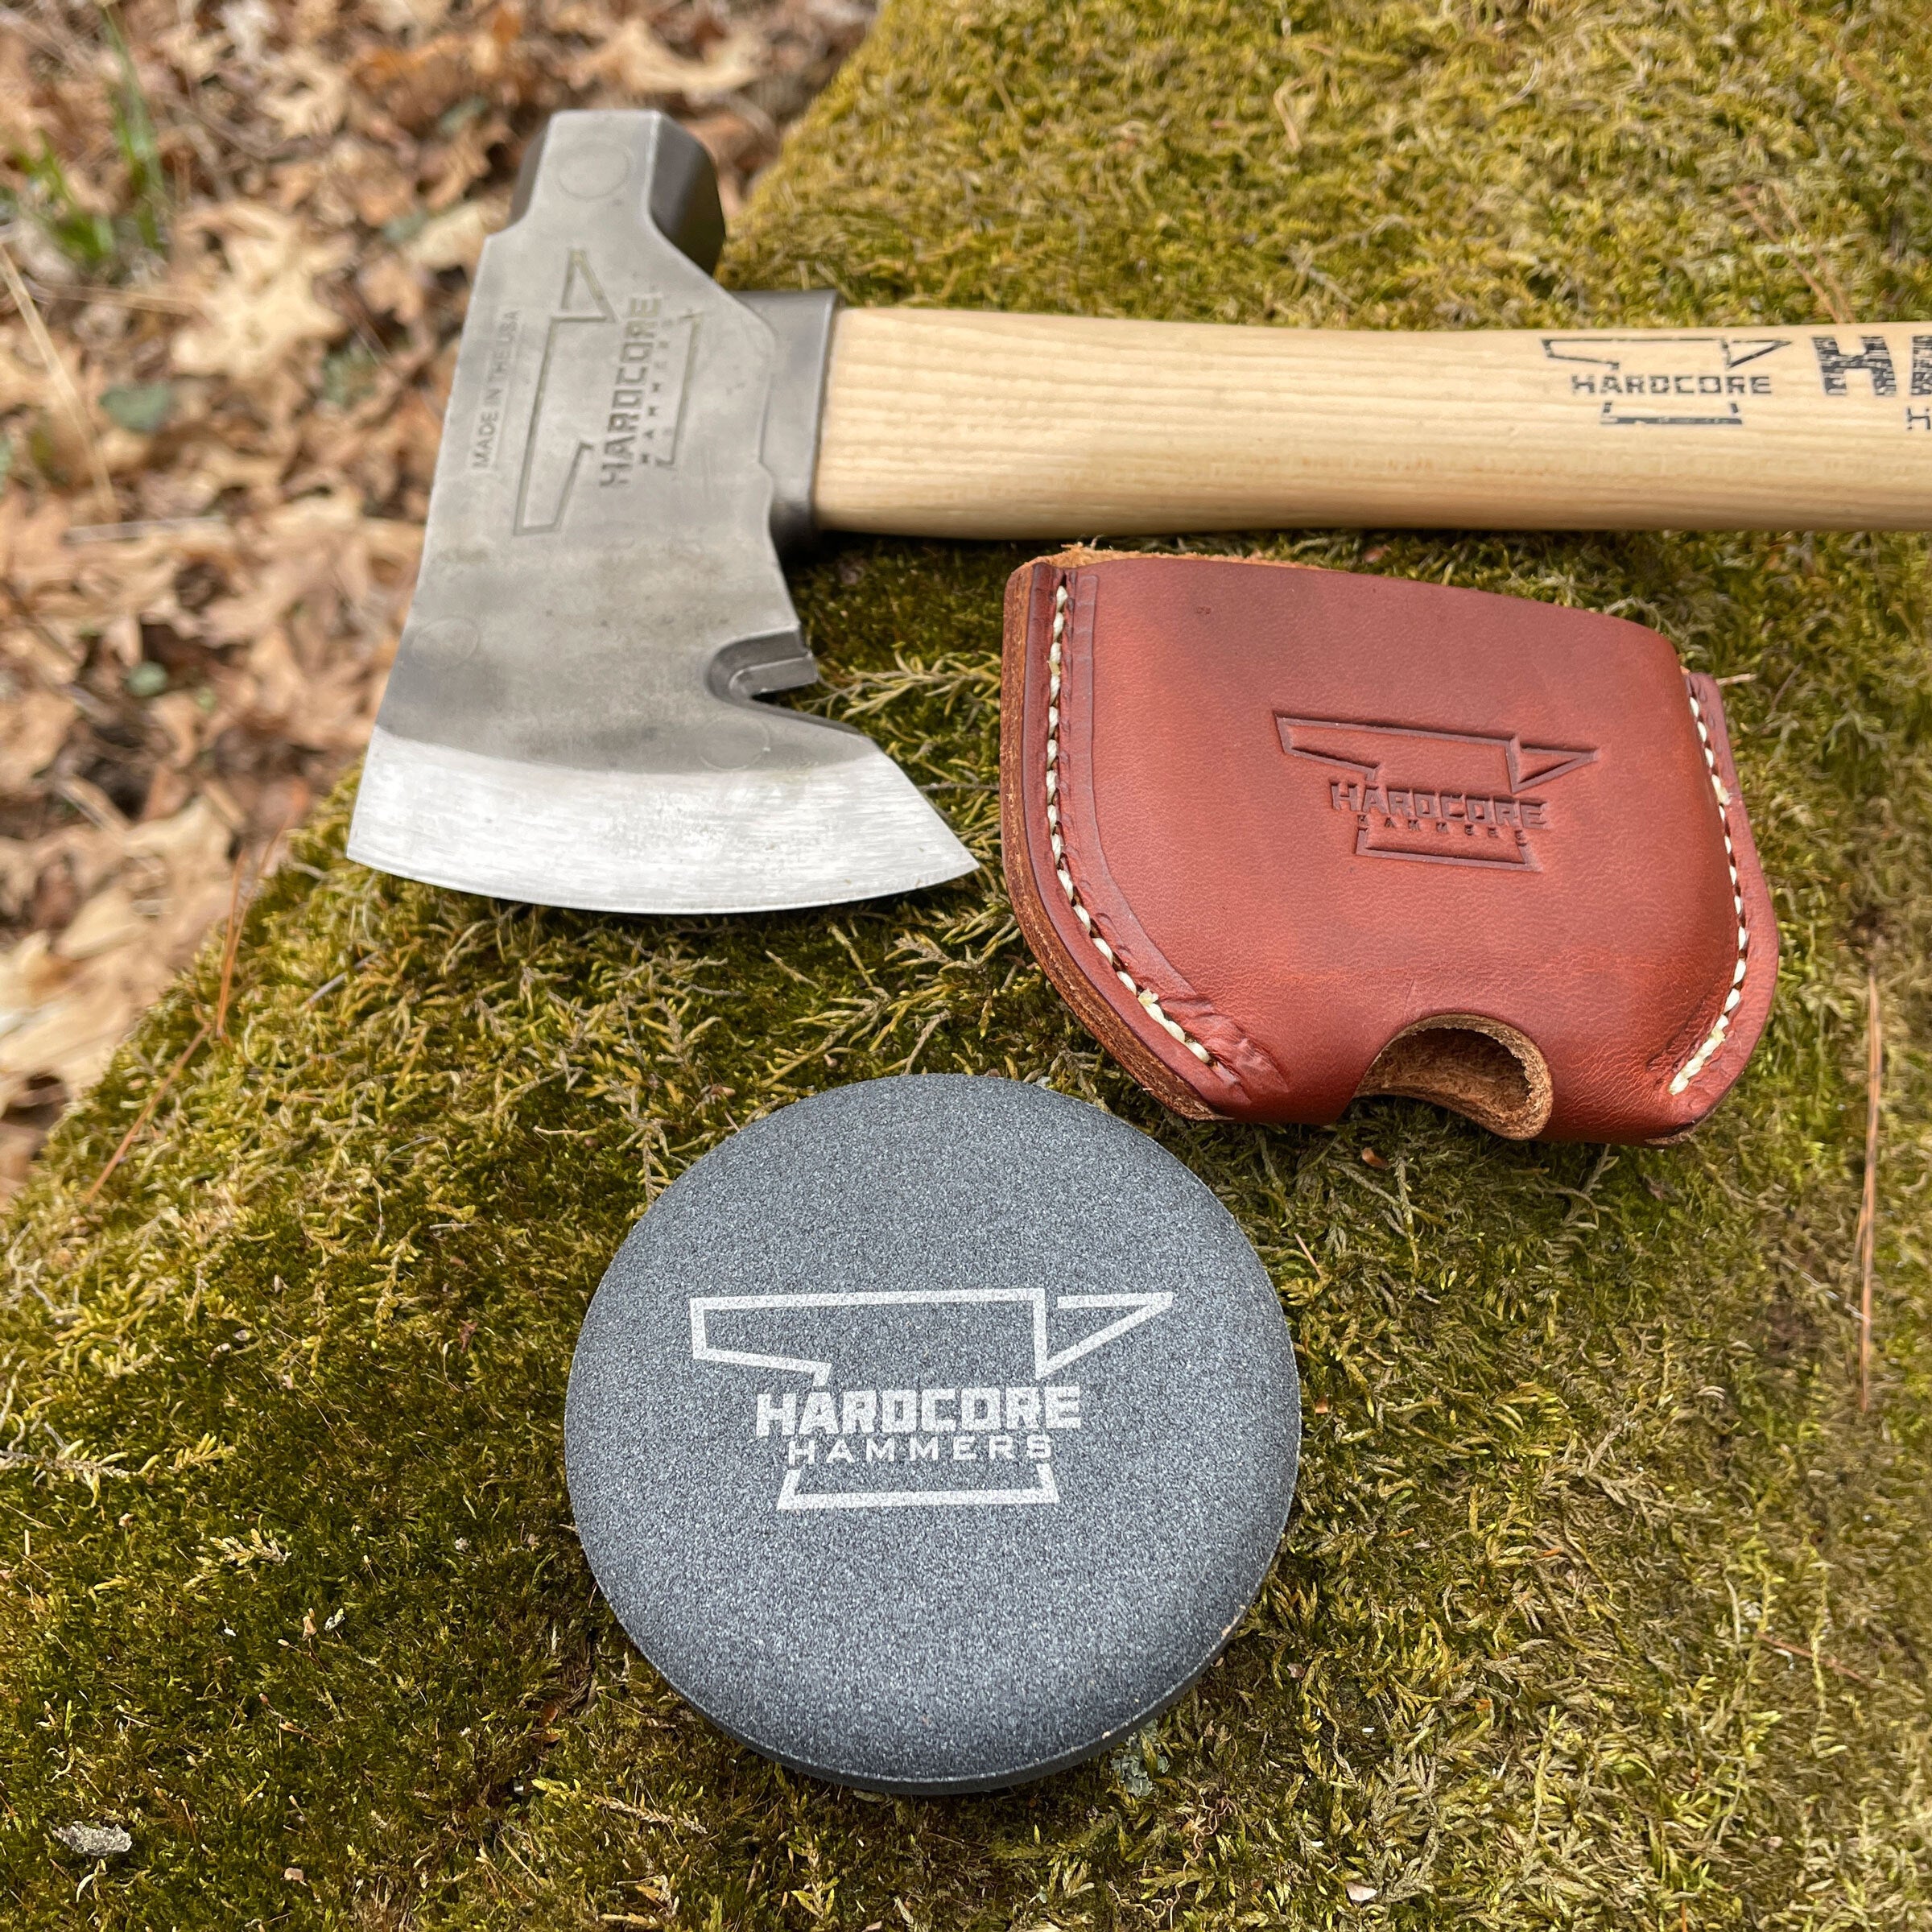 Hardcore Sharpening Stone with Pouch - Trusted Gear Company LLC